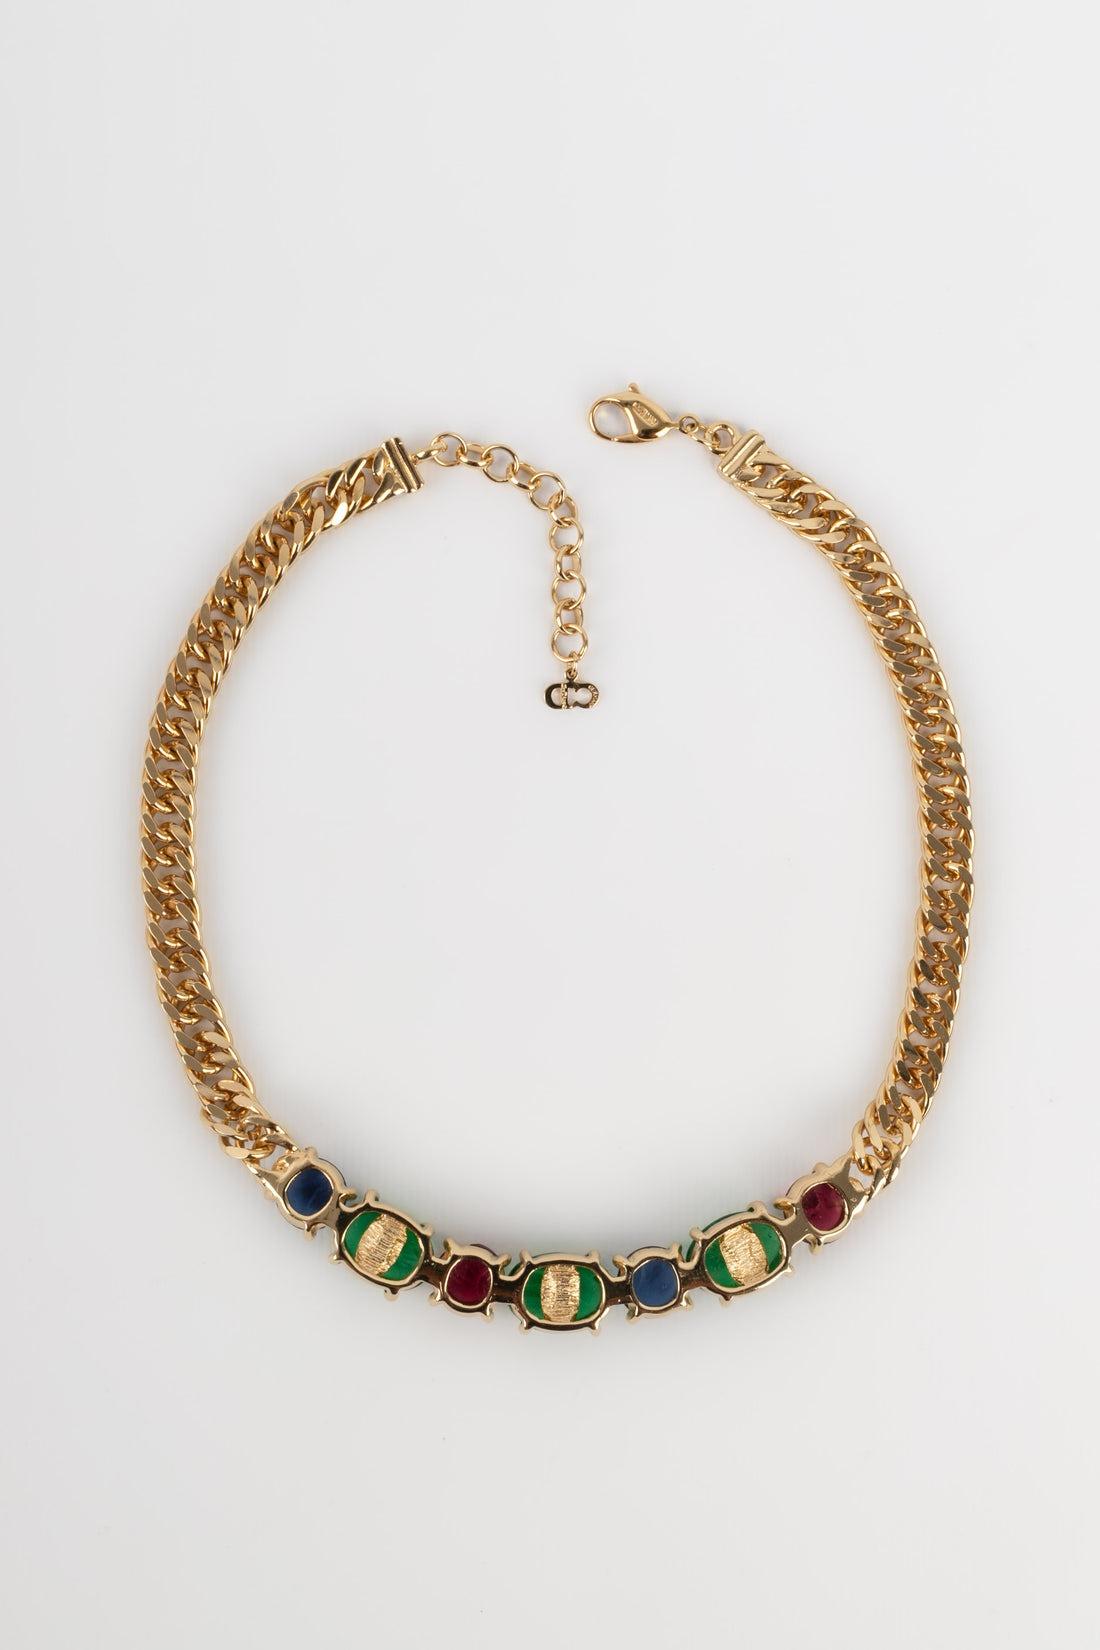 Dior Short Necklace in Gold-Plated Metal with Colored Resin In Excellent Condition For Sale In SAINT-OUEN-SUR-SEINE, FR